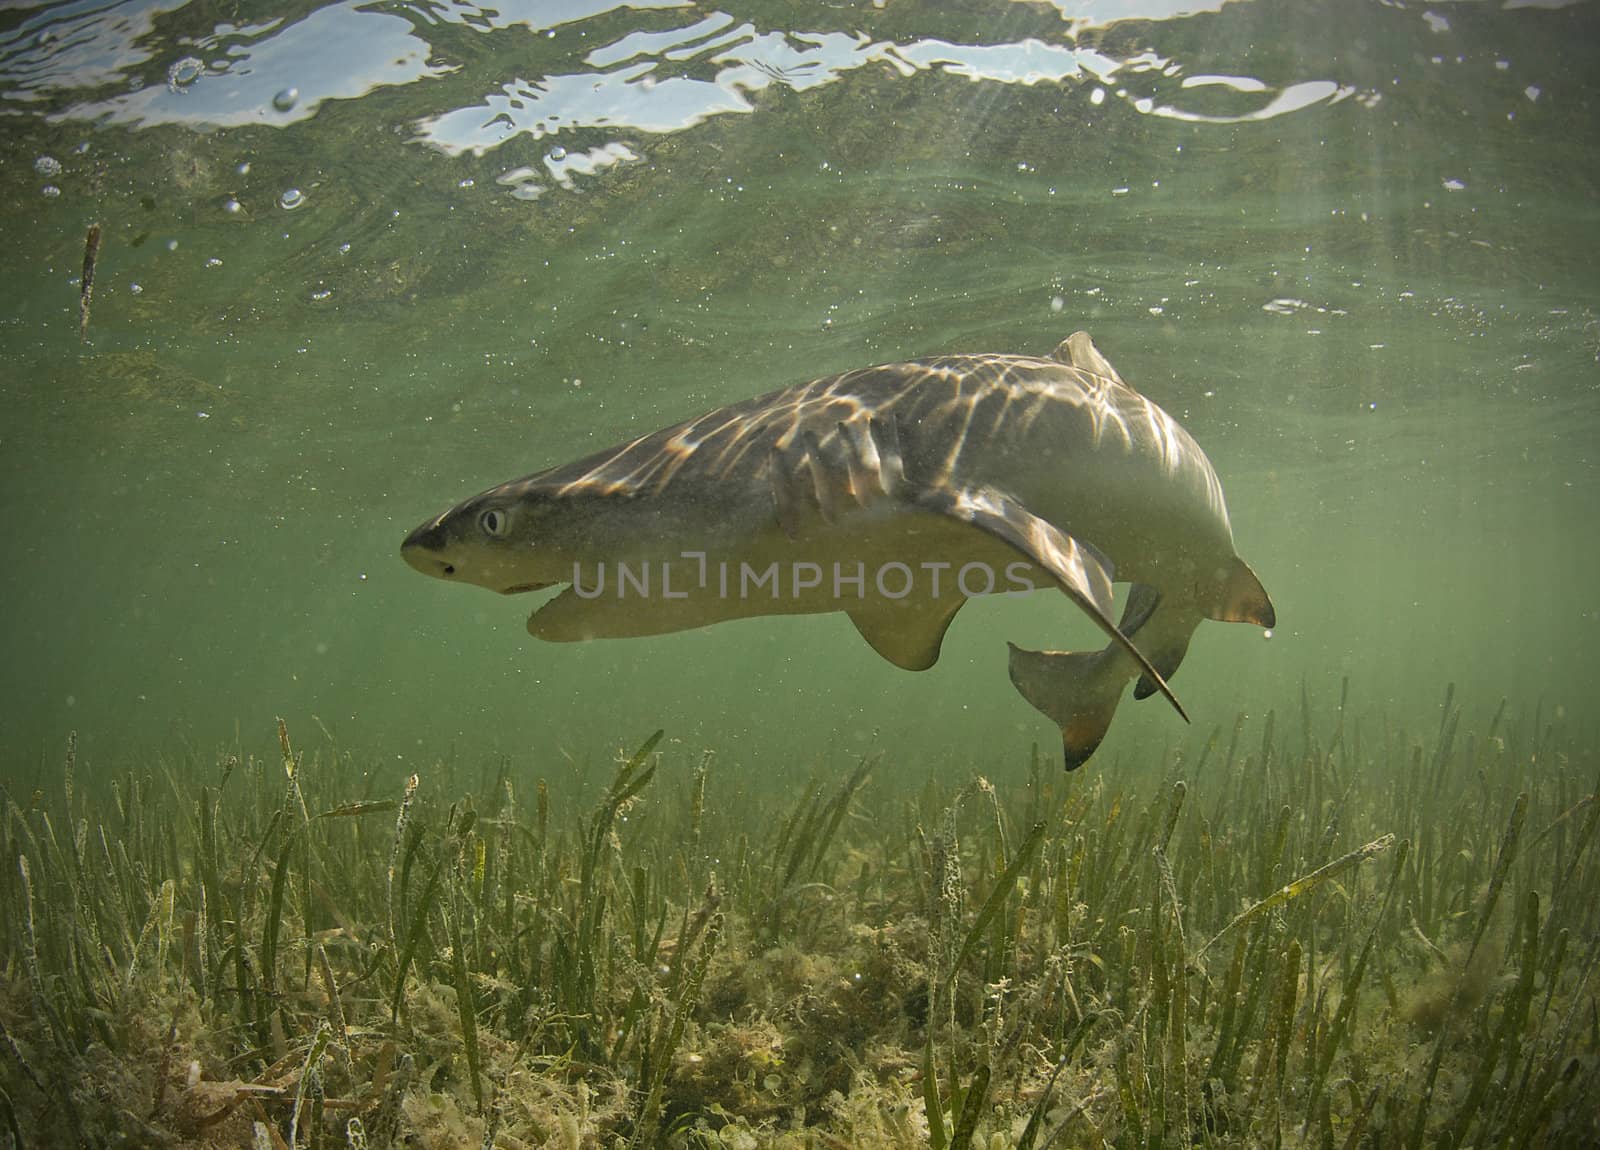 Lemon shark underwater with mouth open by ftlaudgirl